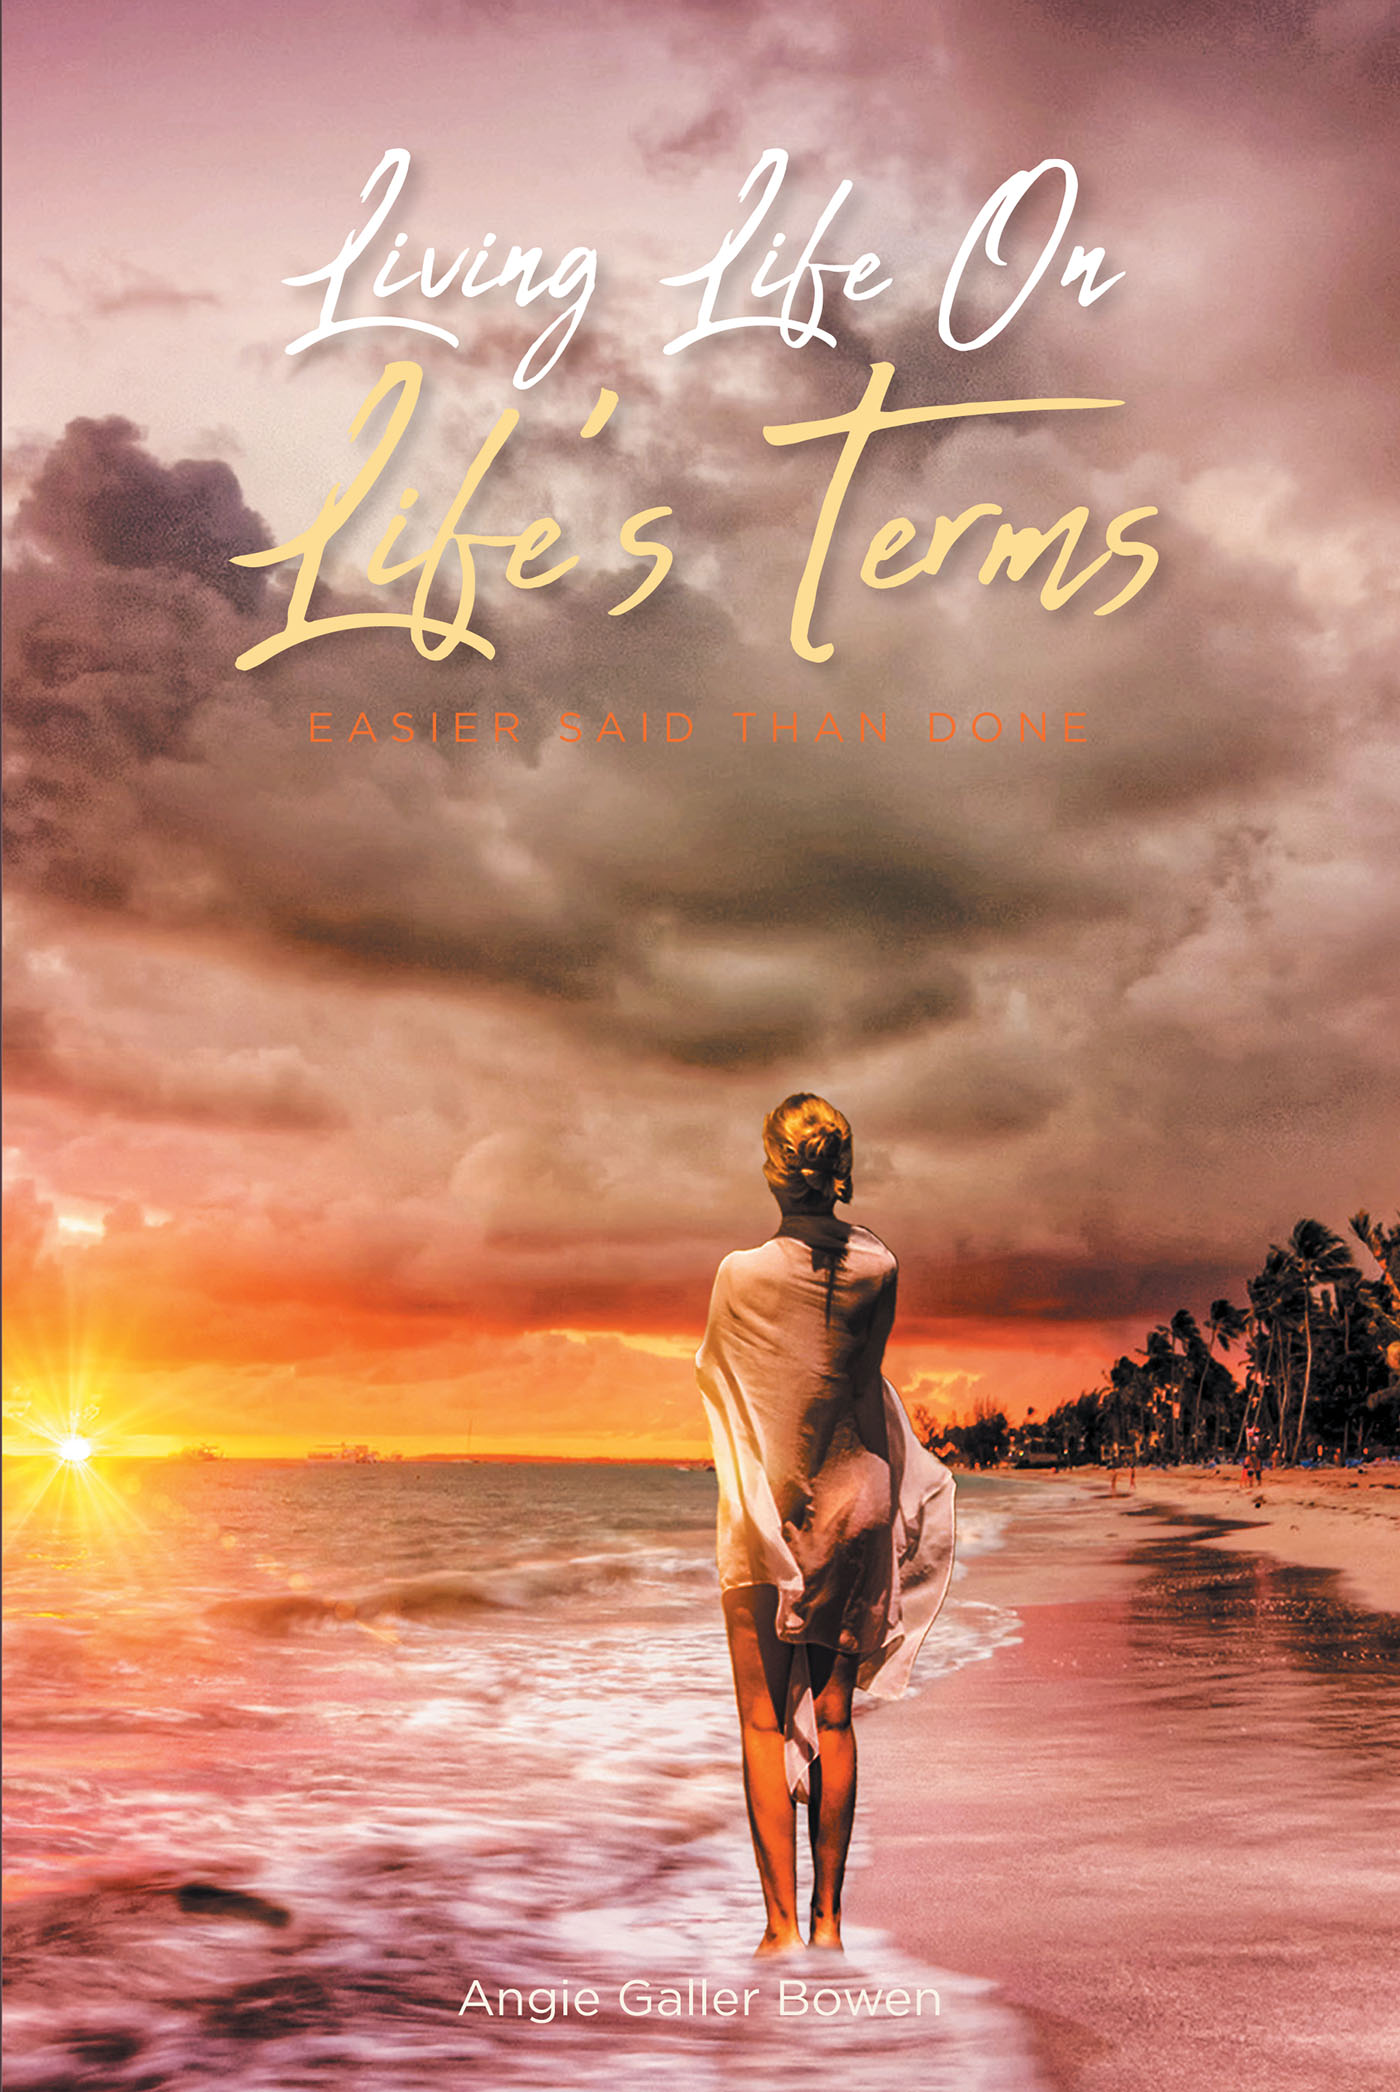 Author Angie Galler Bowen’s New Book, “Living Life On Life's Terms: Easier Said than Done,” Follows the Complicated Love Story of Cody and David